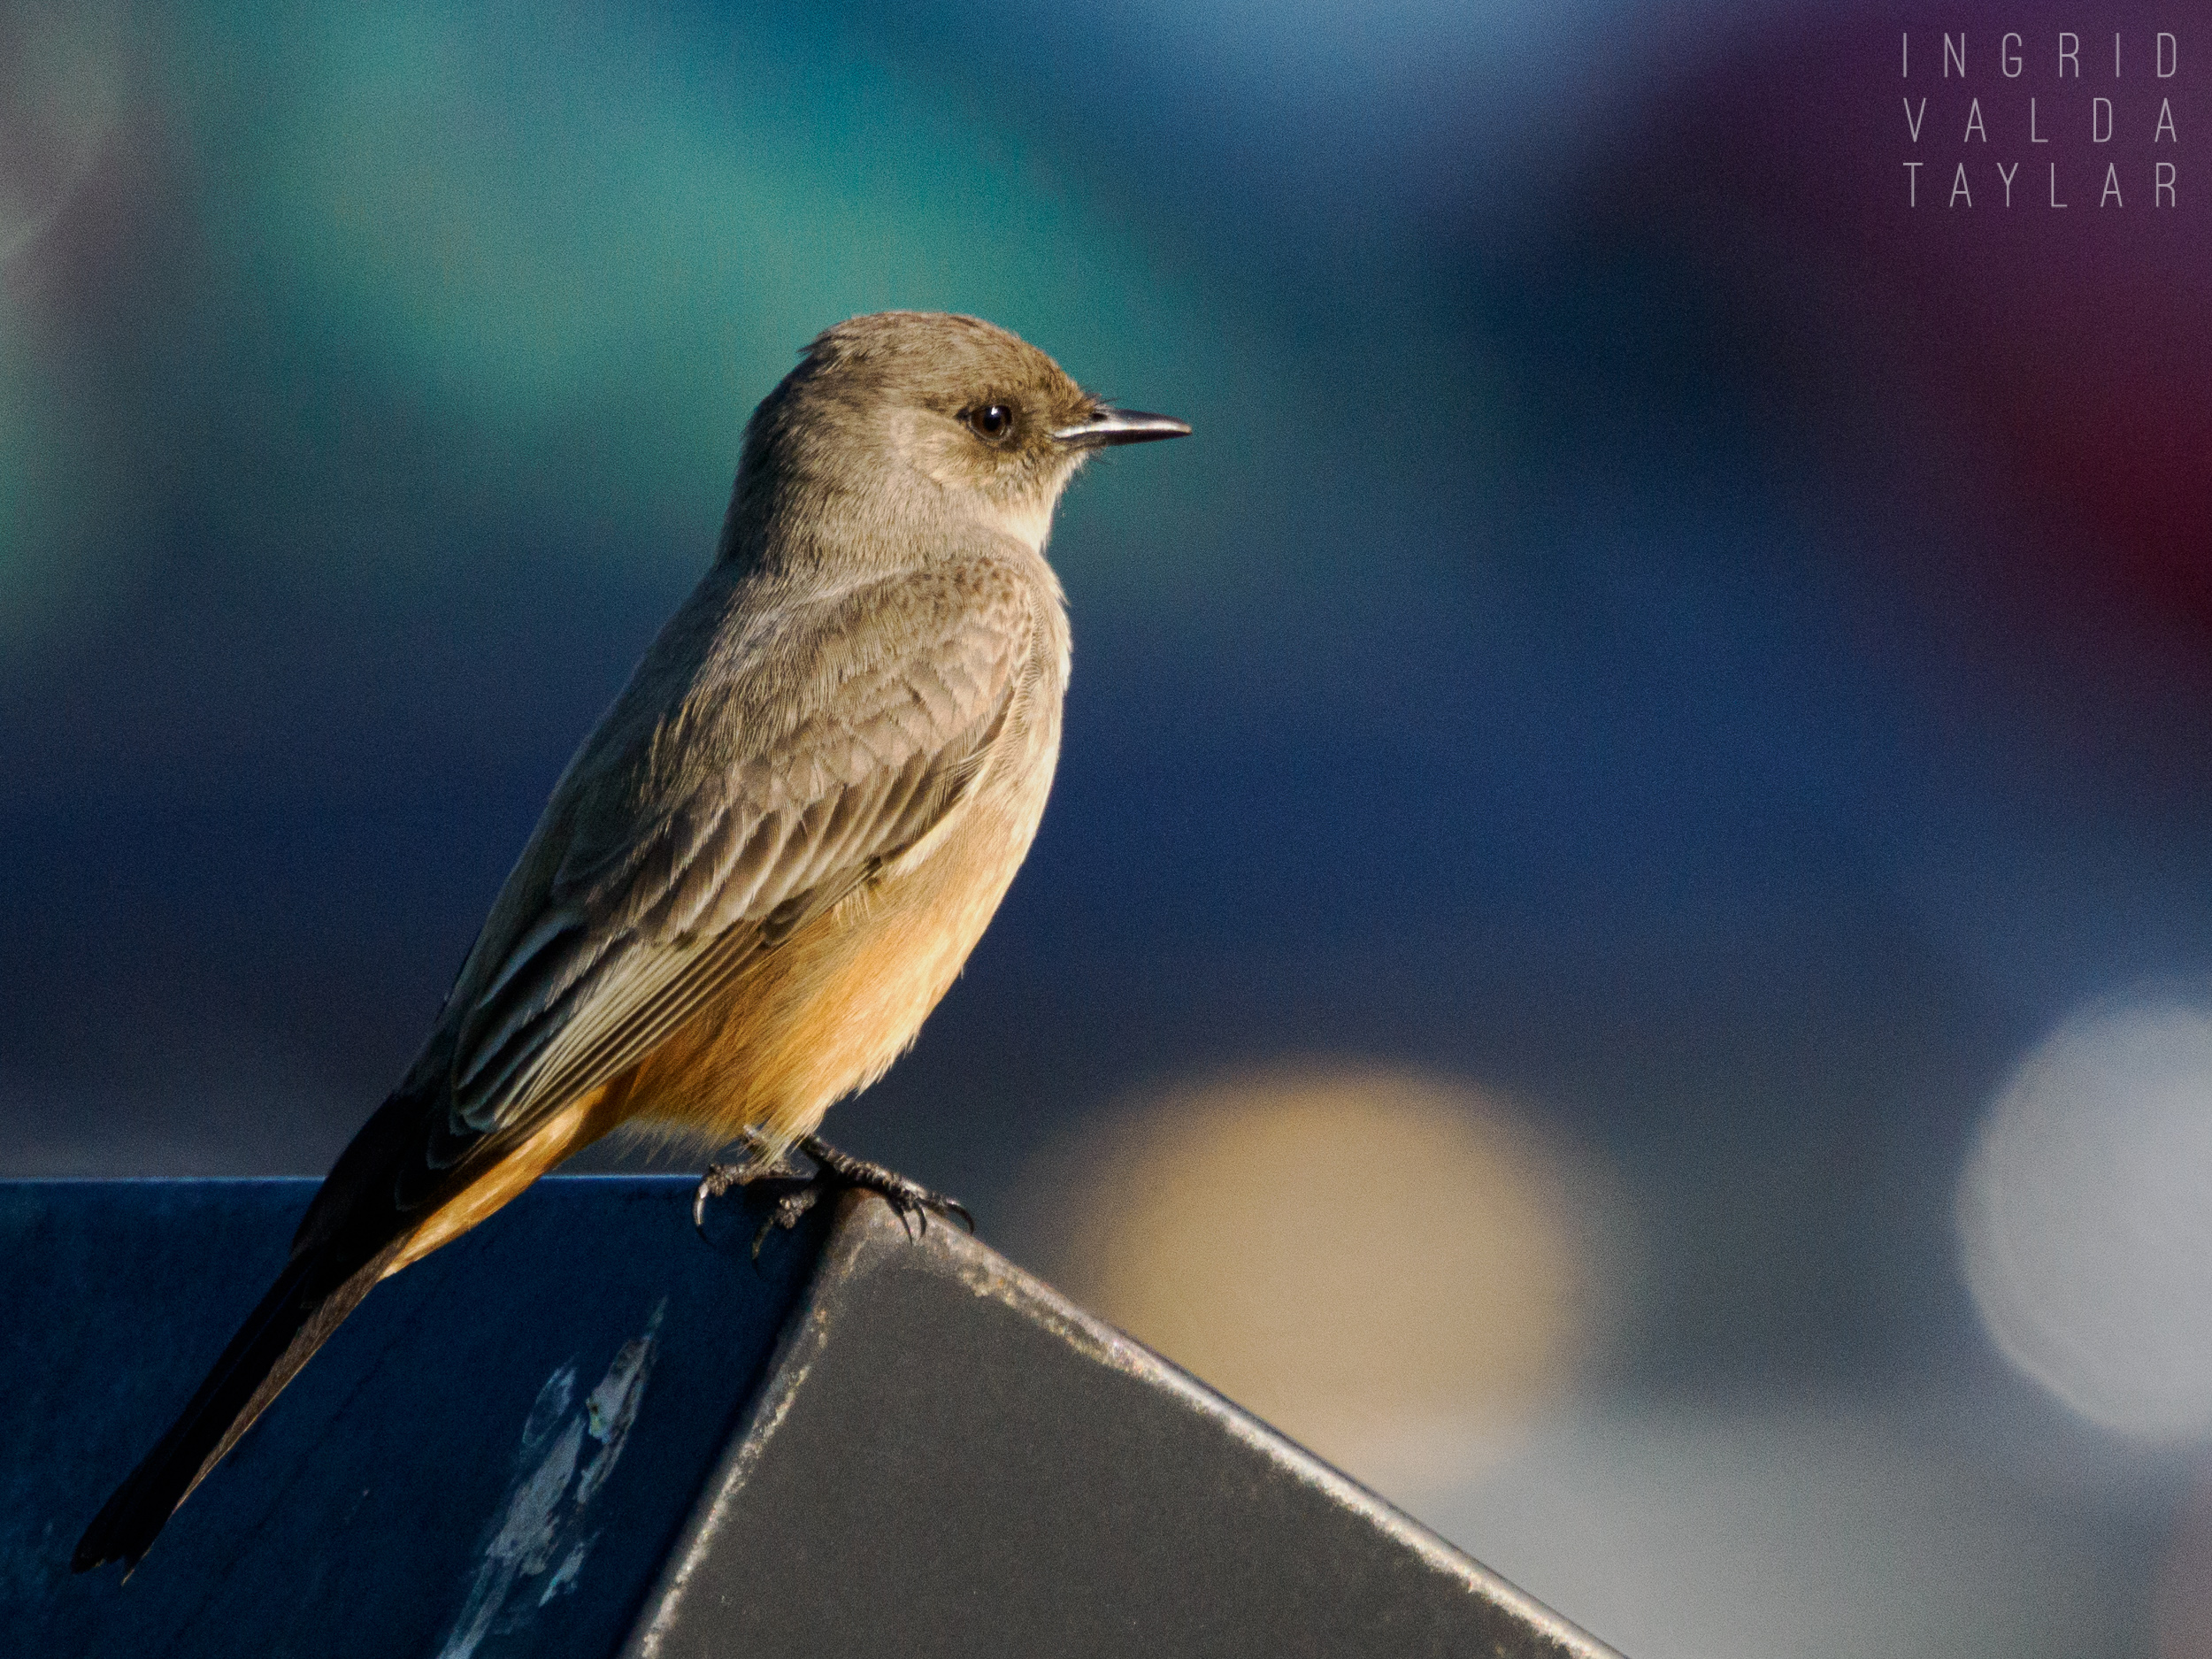 Say's Phoebe at Crissy Field